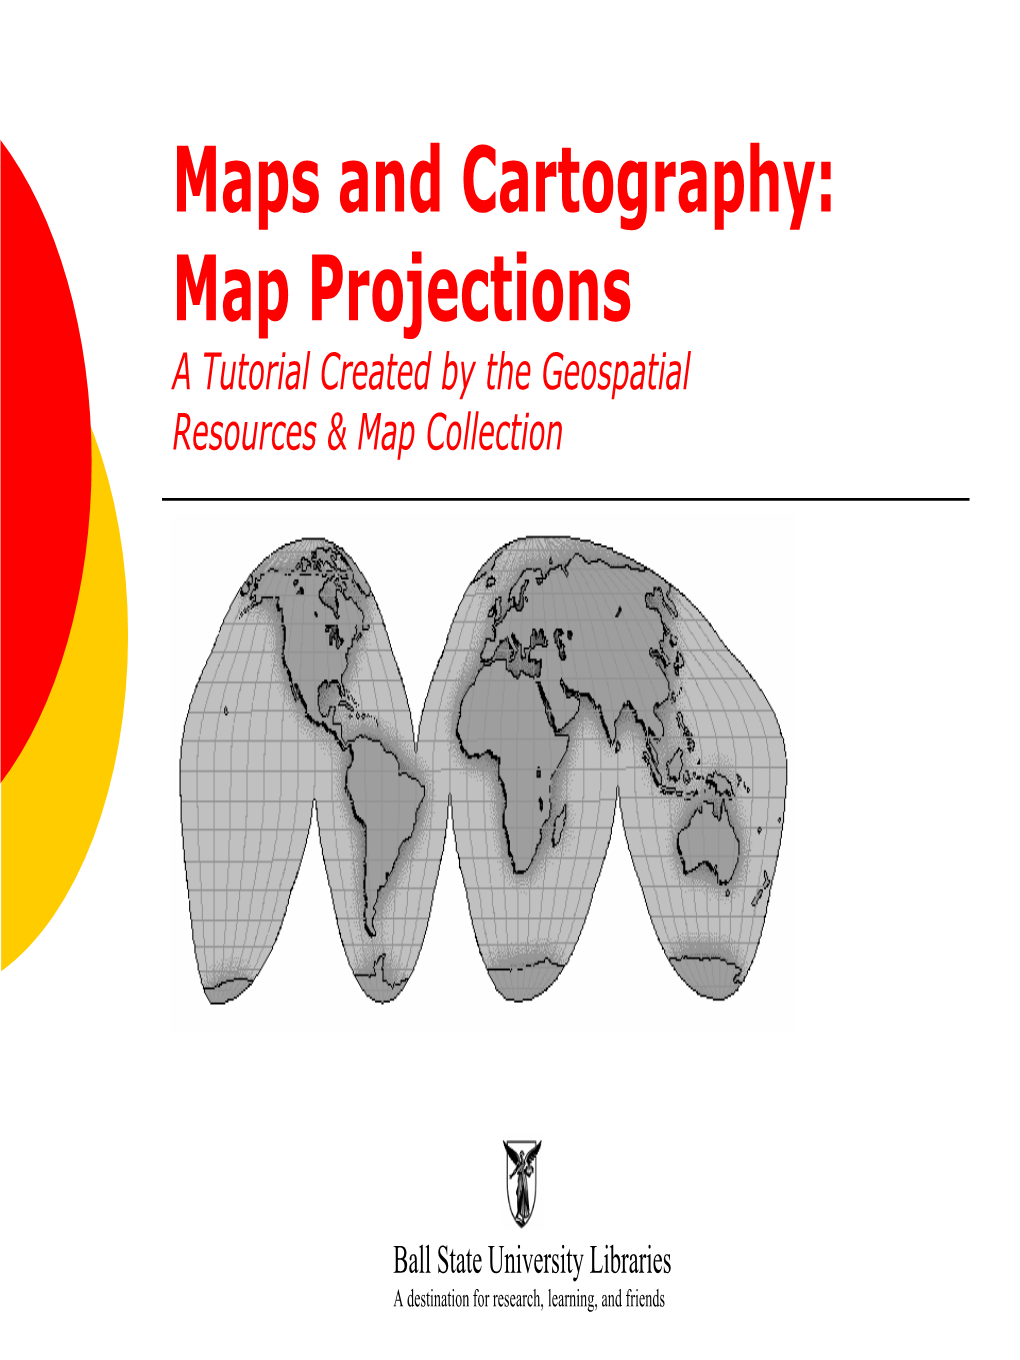 Maps and Cartography: Map Projections a Tutorial Created by the Geospatial Resources & Map Collection